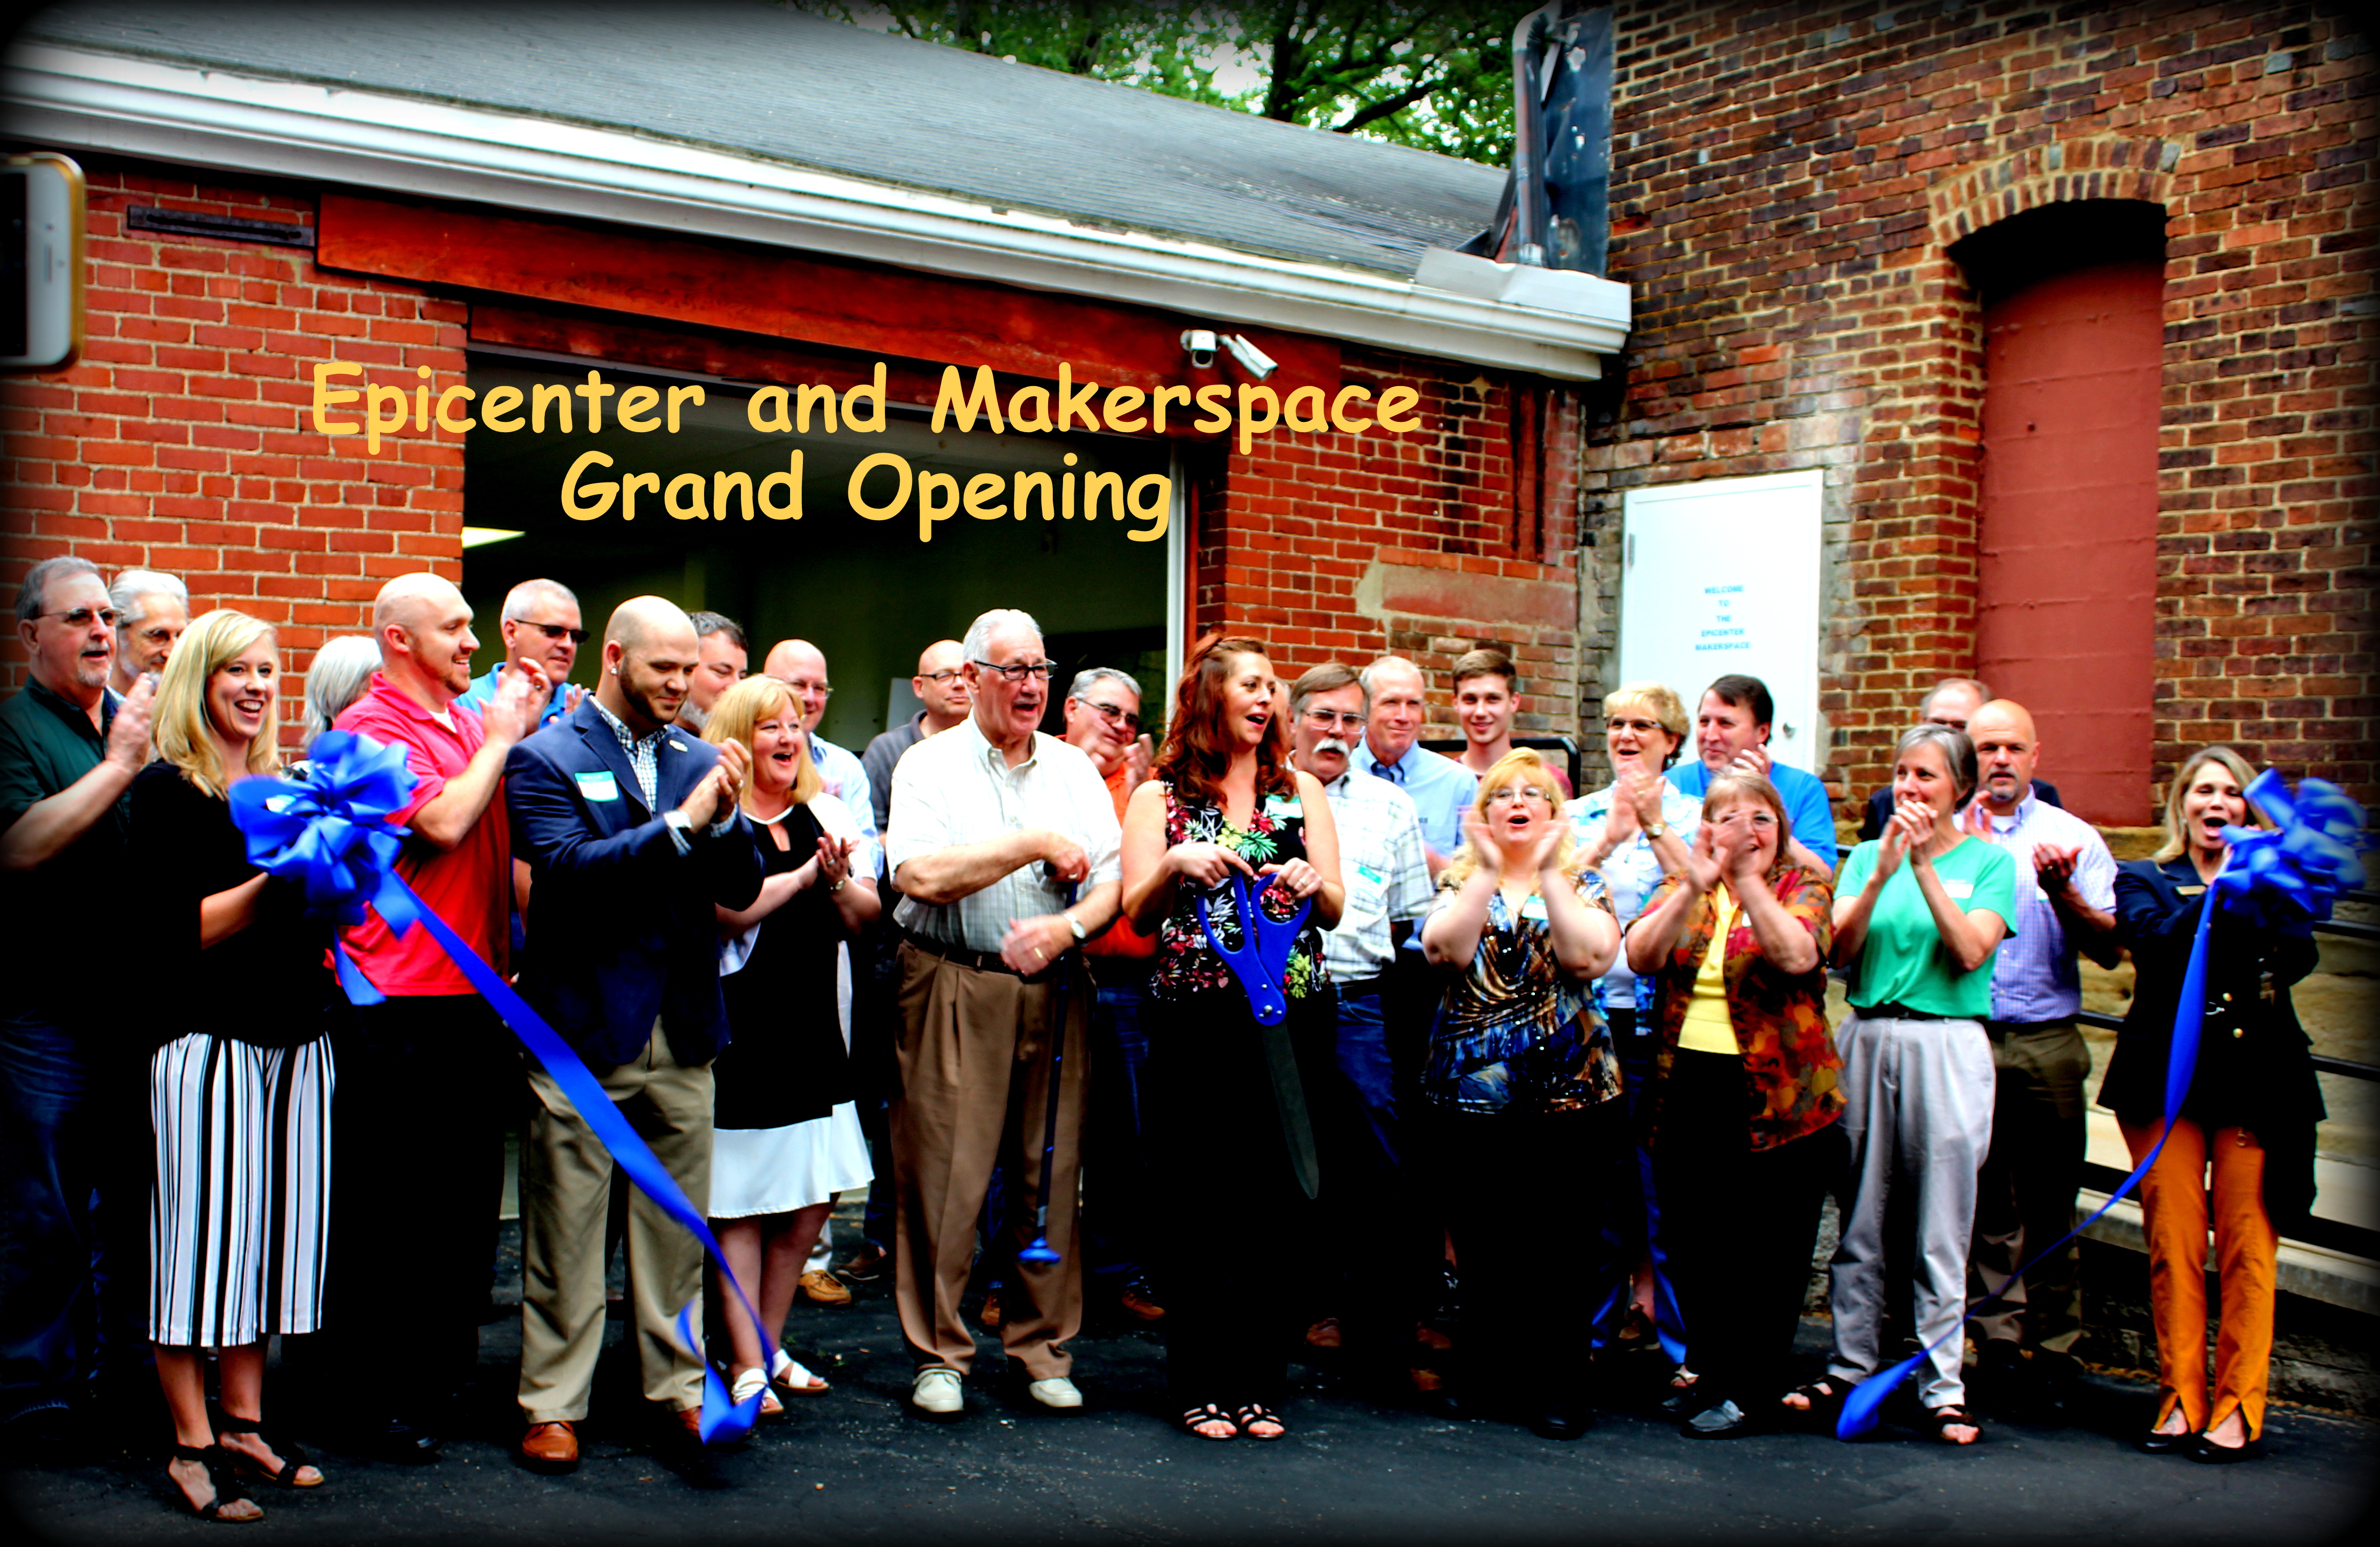 Epicenter and Makerspace Grand Opening